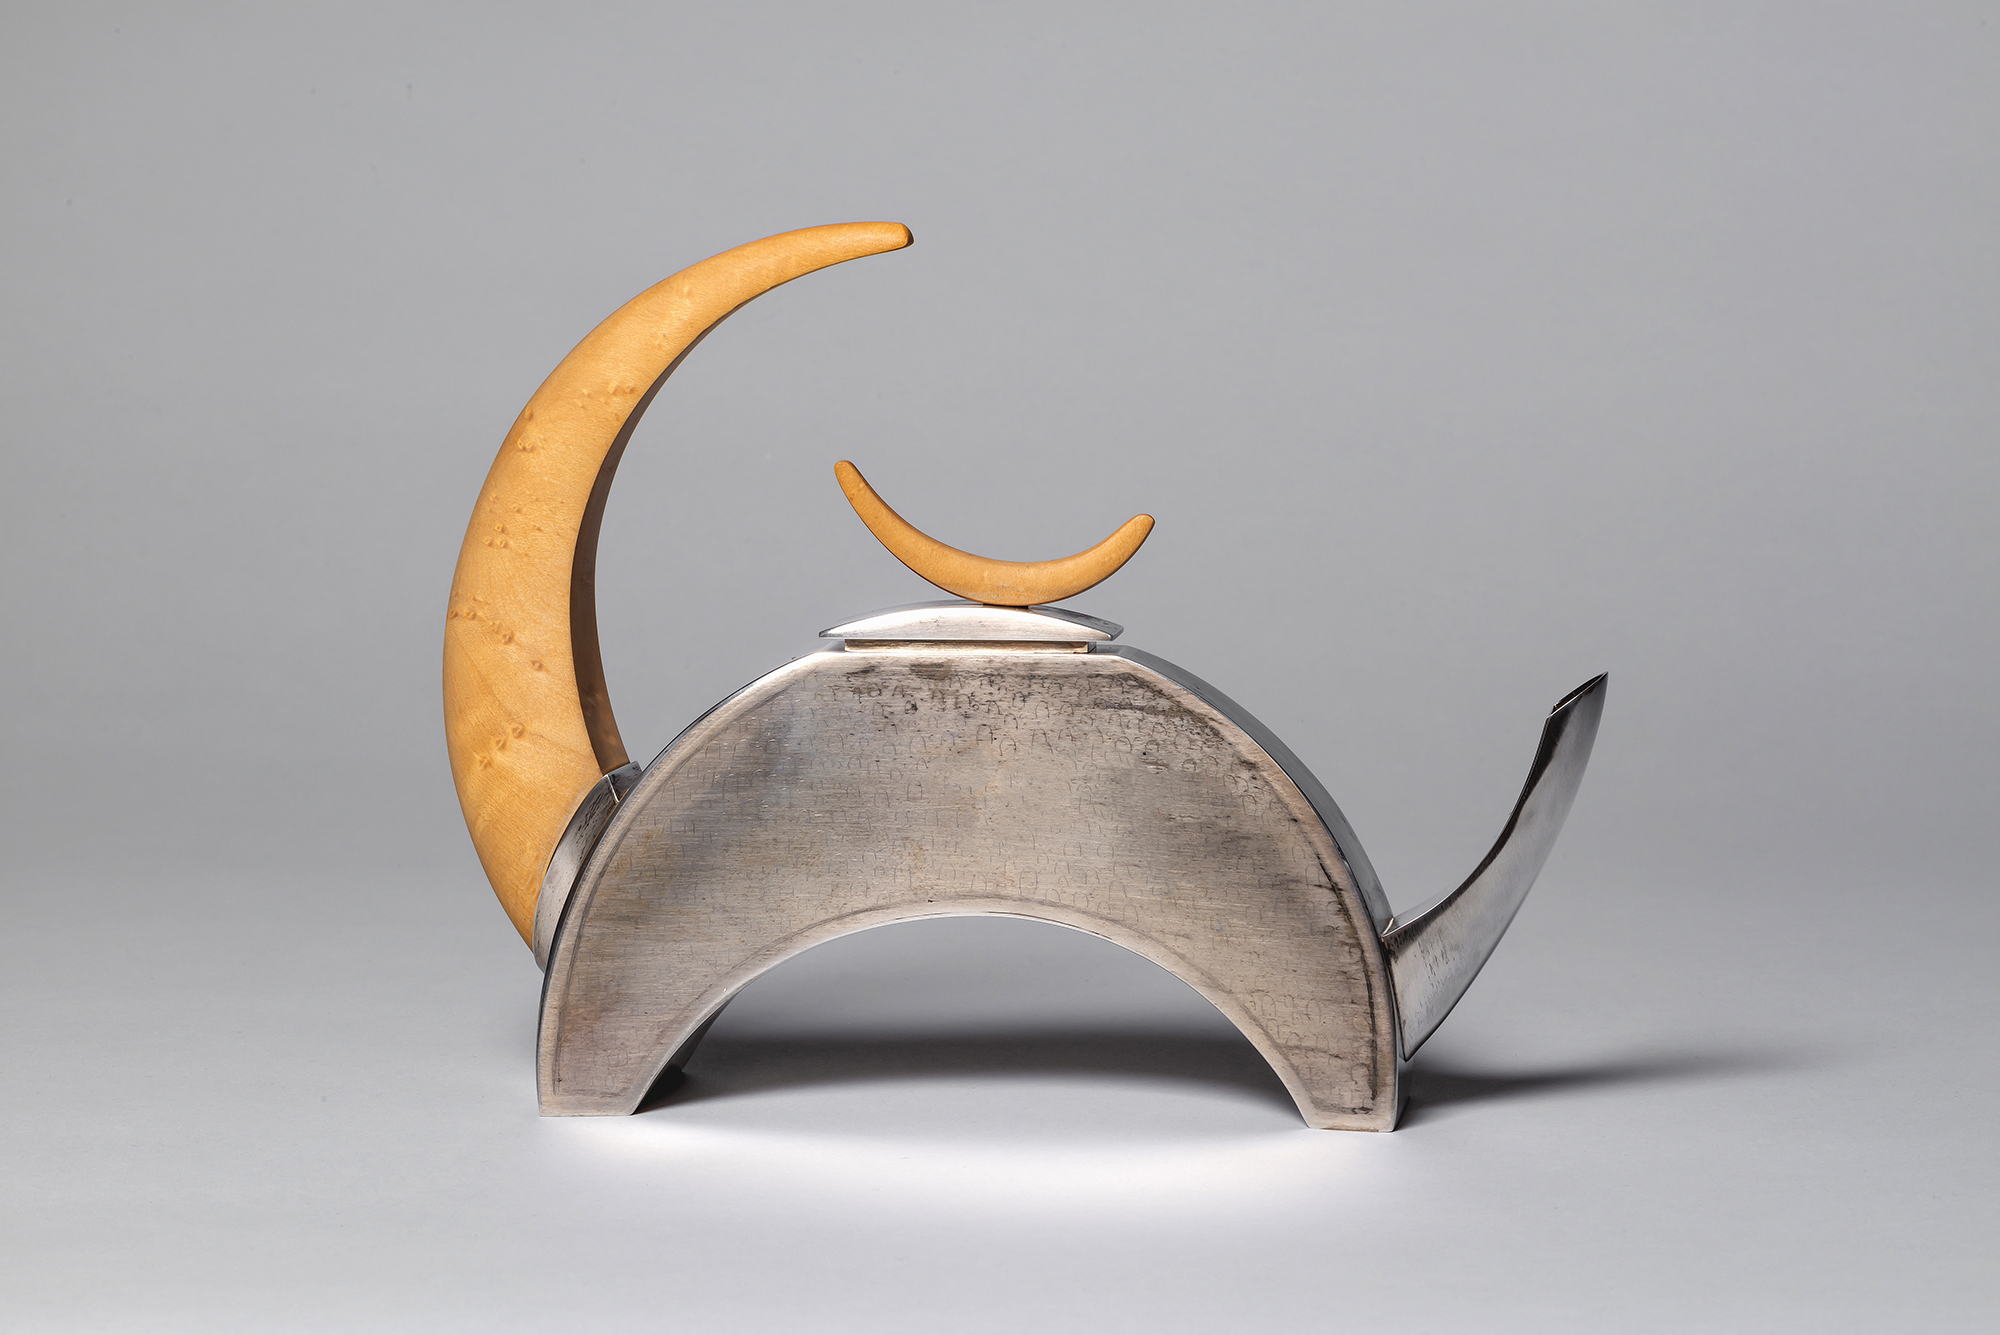 “Subtle-tea” by Michael Massie (Happy Valley-Goose Bay, b 1962), 1997. Silver, wood. Collection of the Winnipeg Art Gallery, gift of the Canadian Museum of Inuit Art, 2017-564. Courtesy Qaumajuq at the WAG.